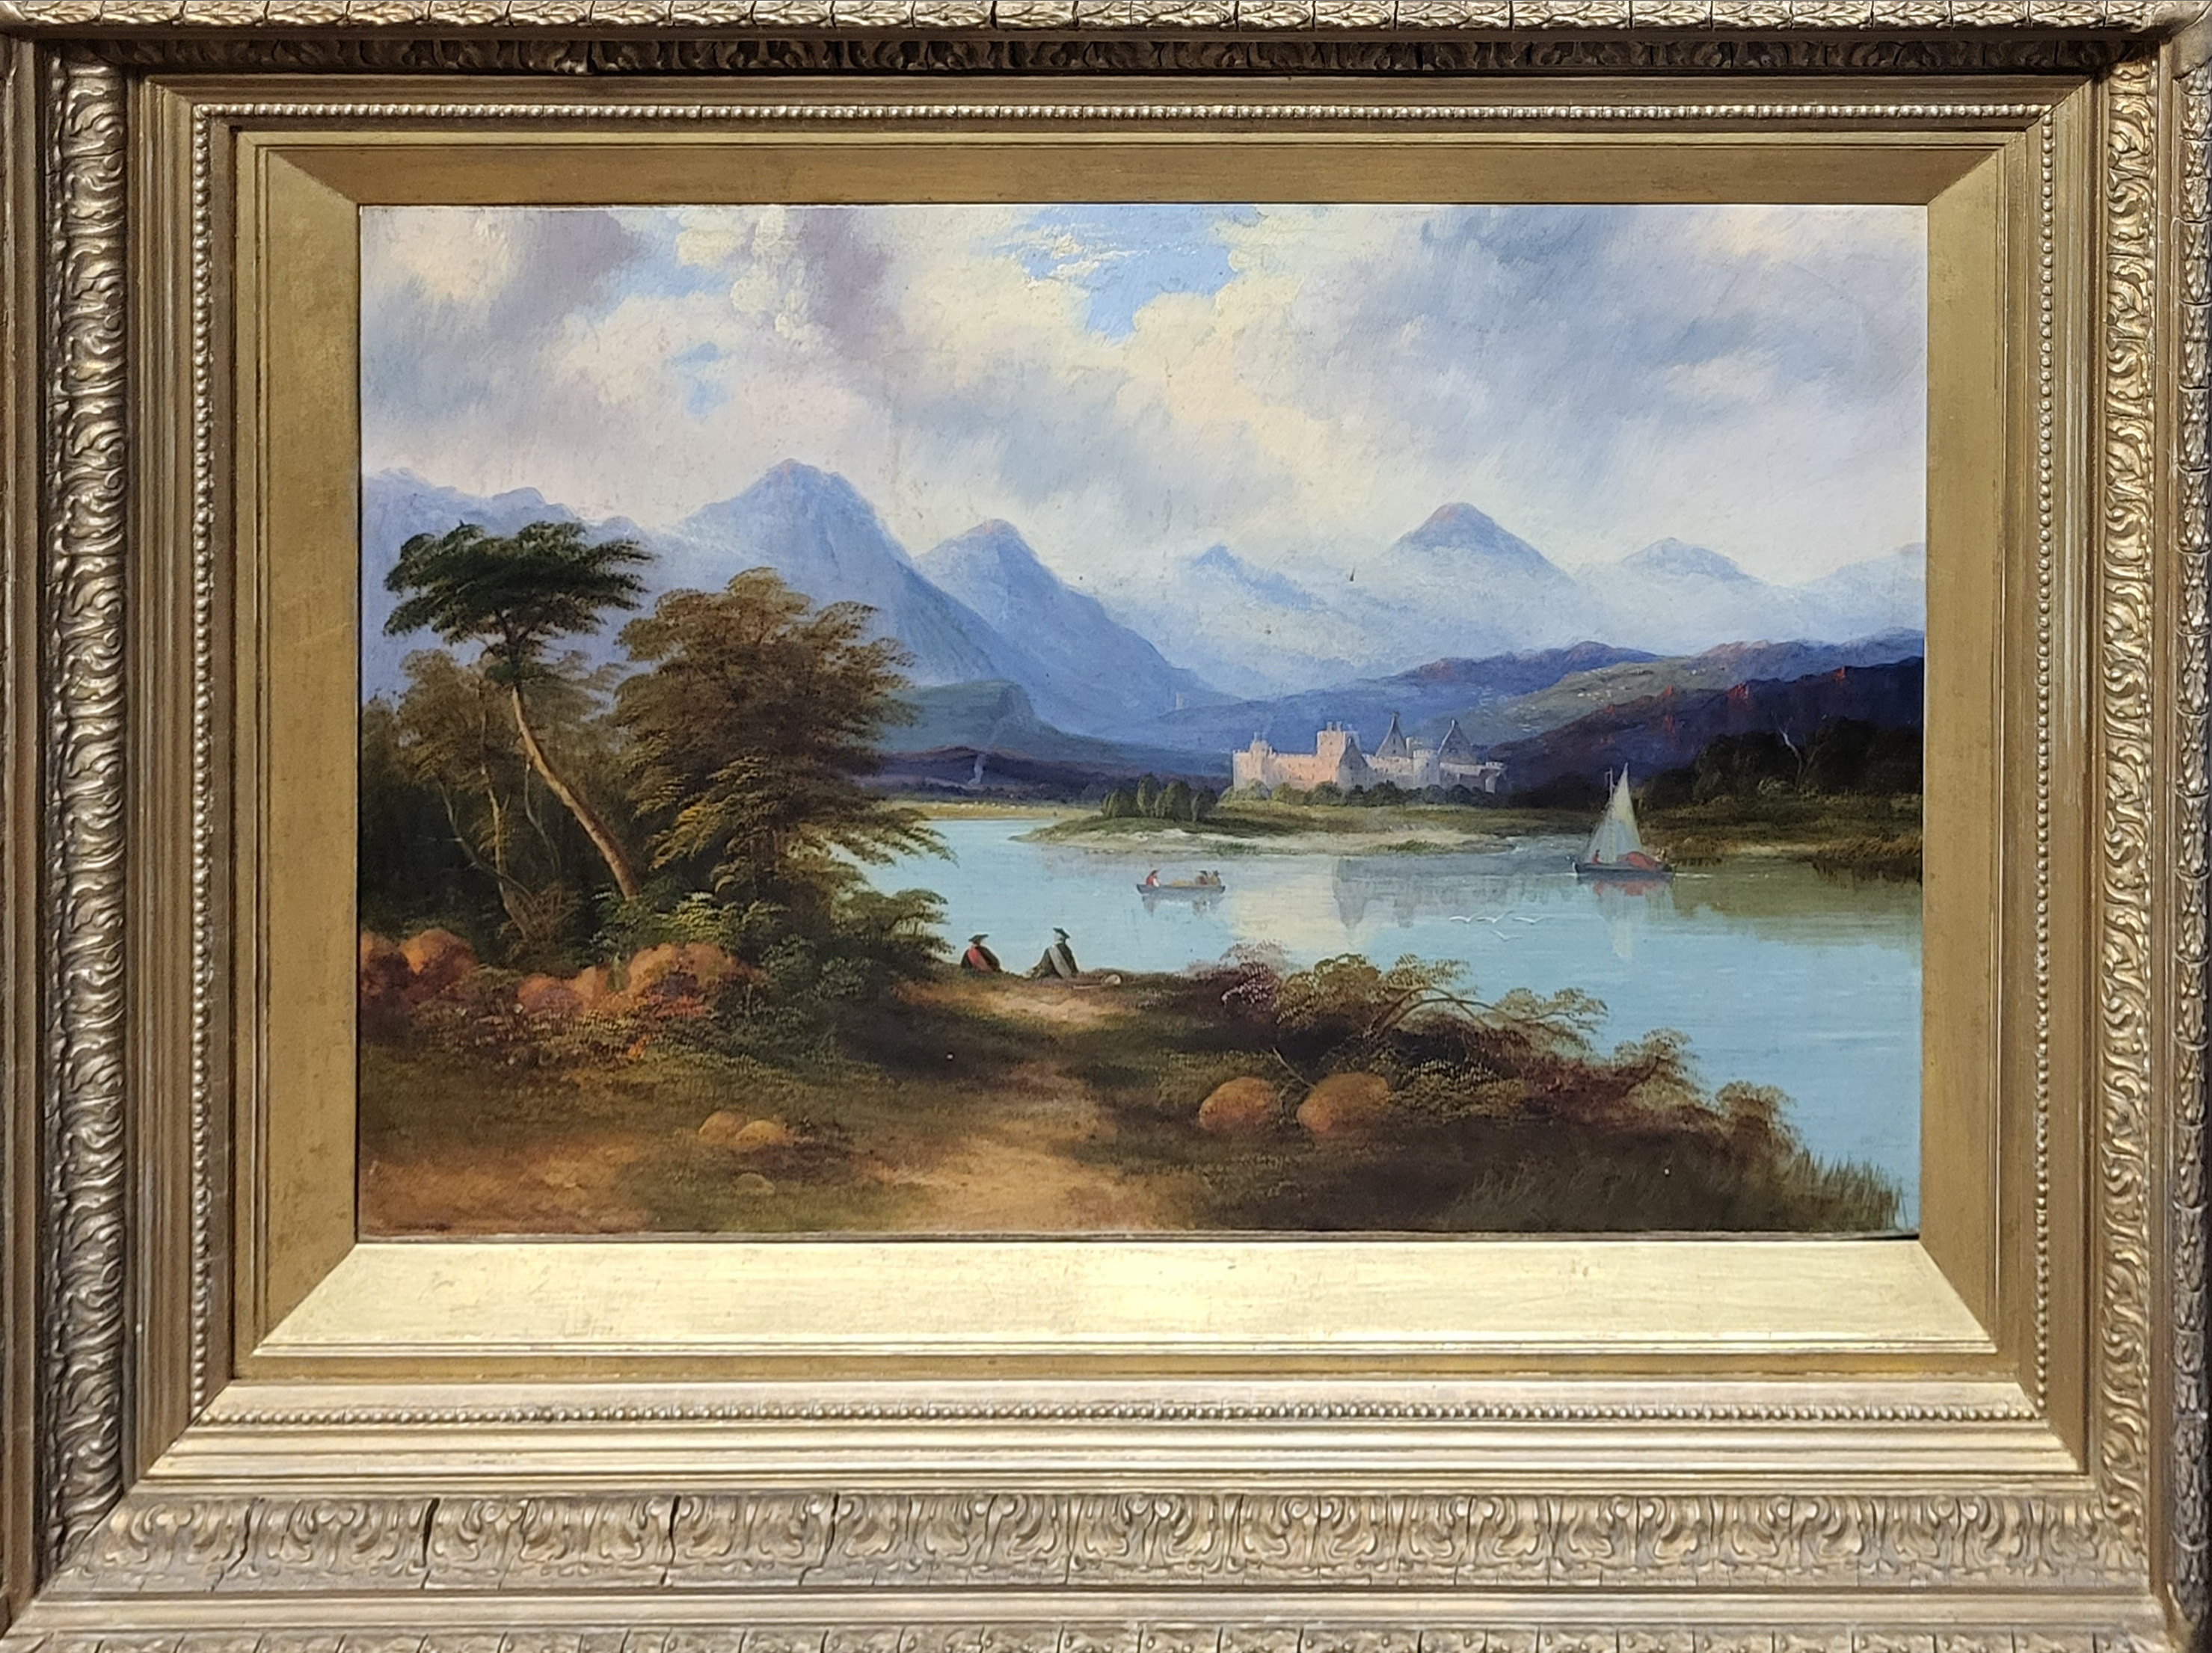 A 19TH CENTURY OIL ON CANVAS, SAILING BOATS ON A SCOTTISH LOCH With castle and mountains beyond, - Image 2 of 3